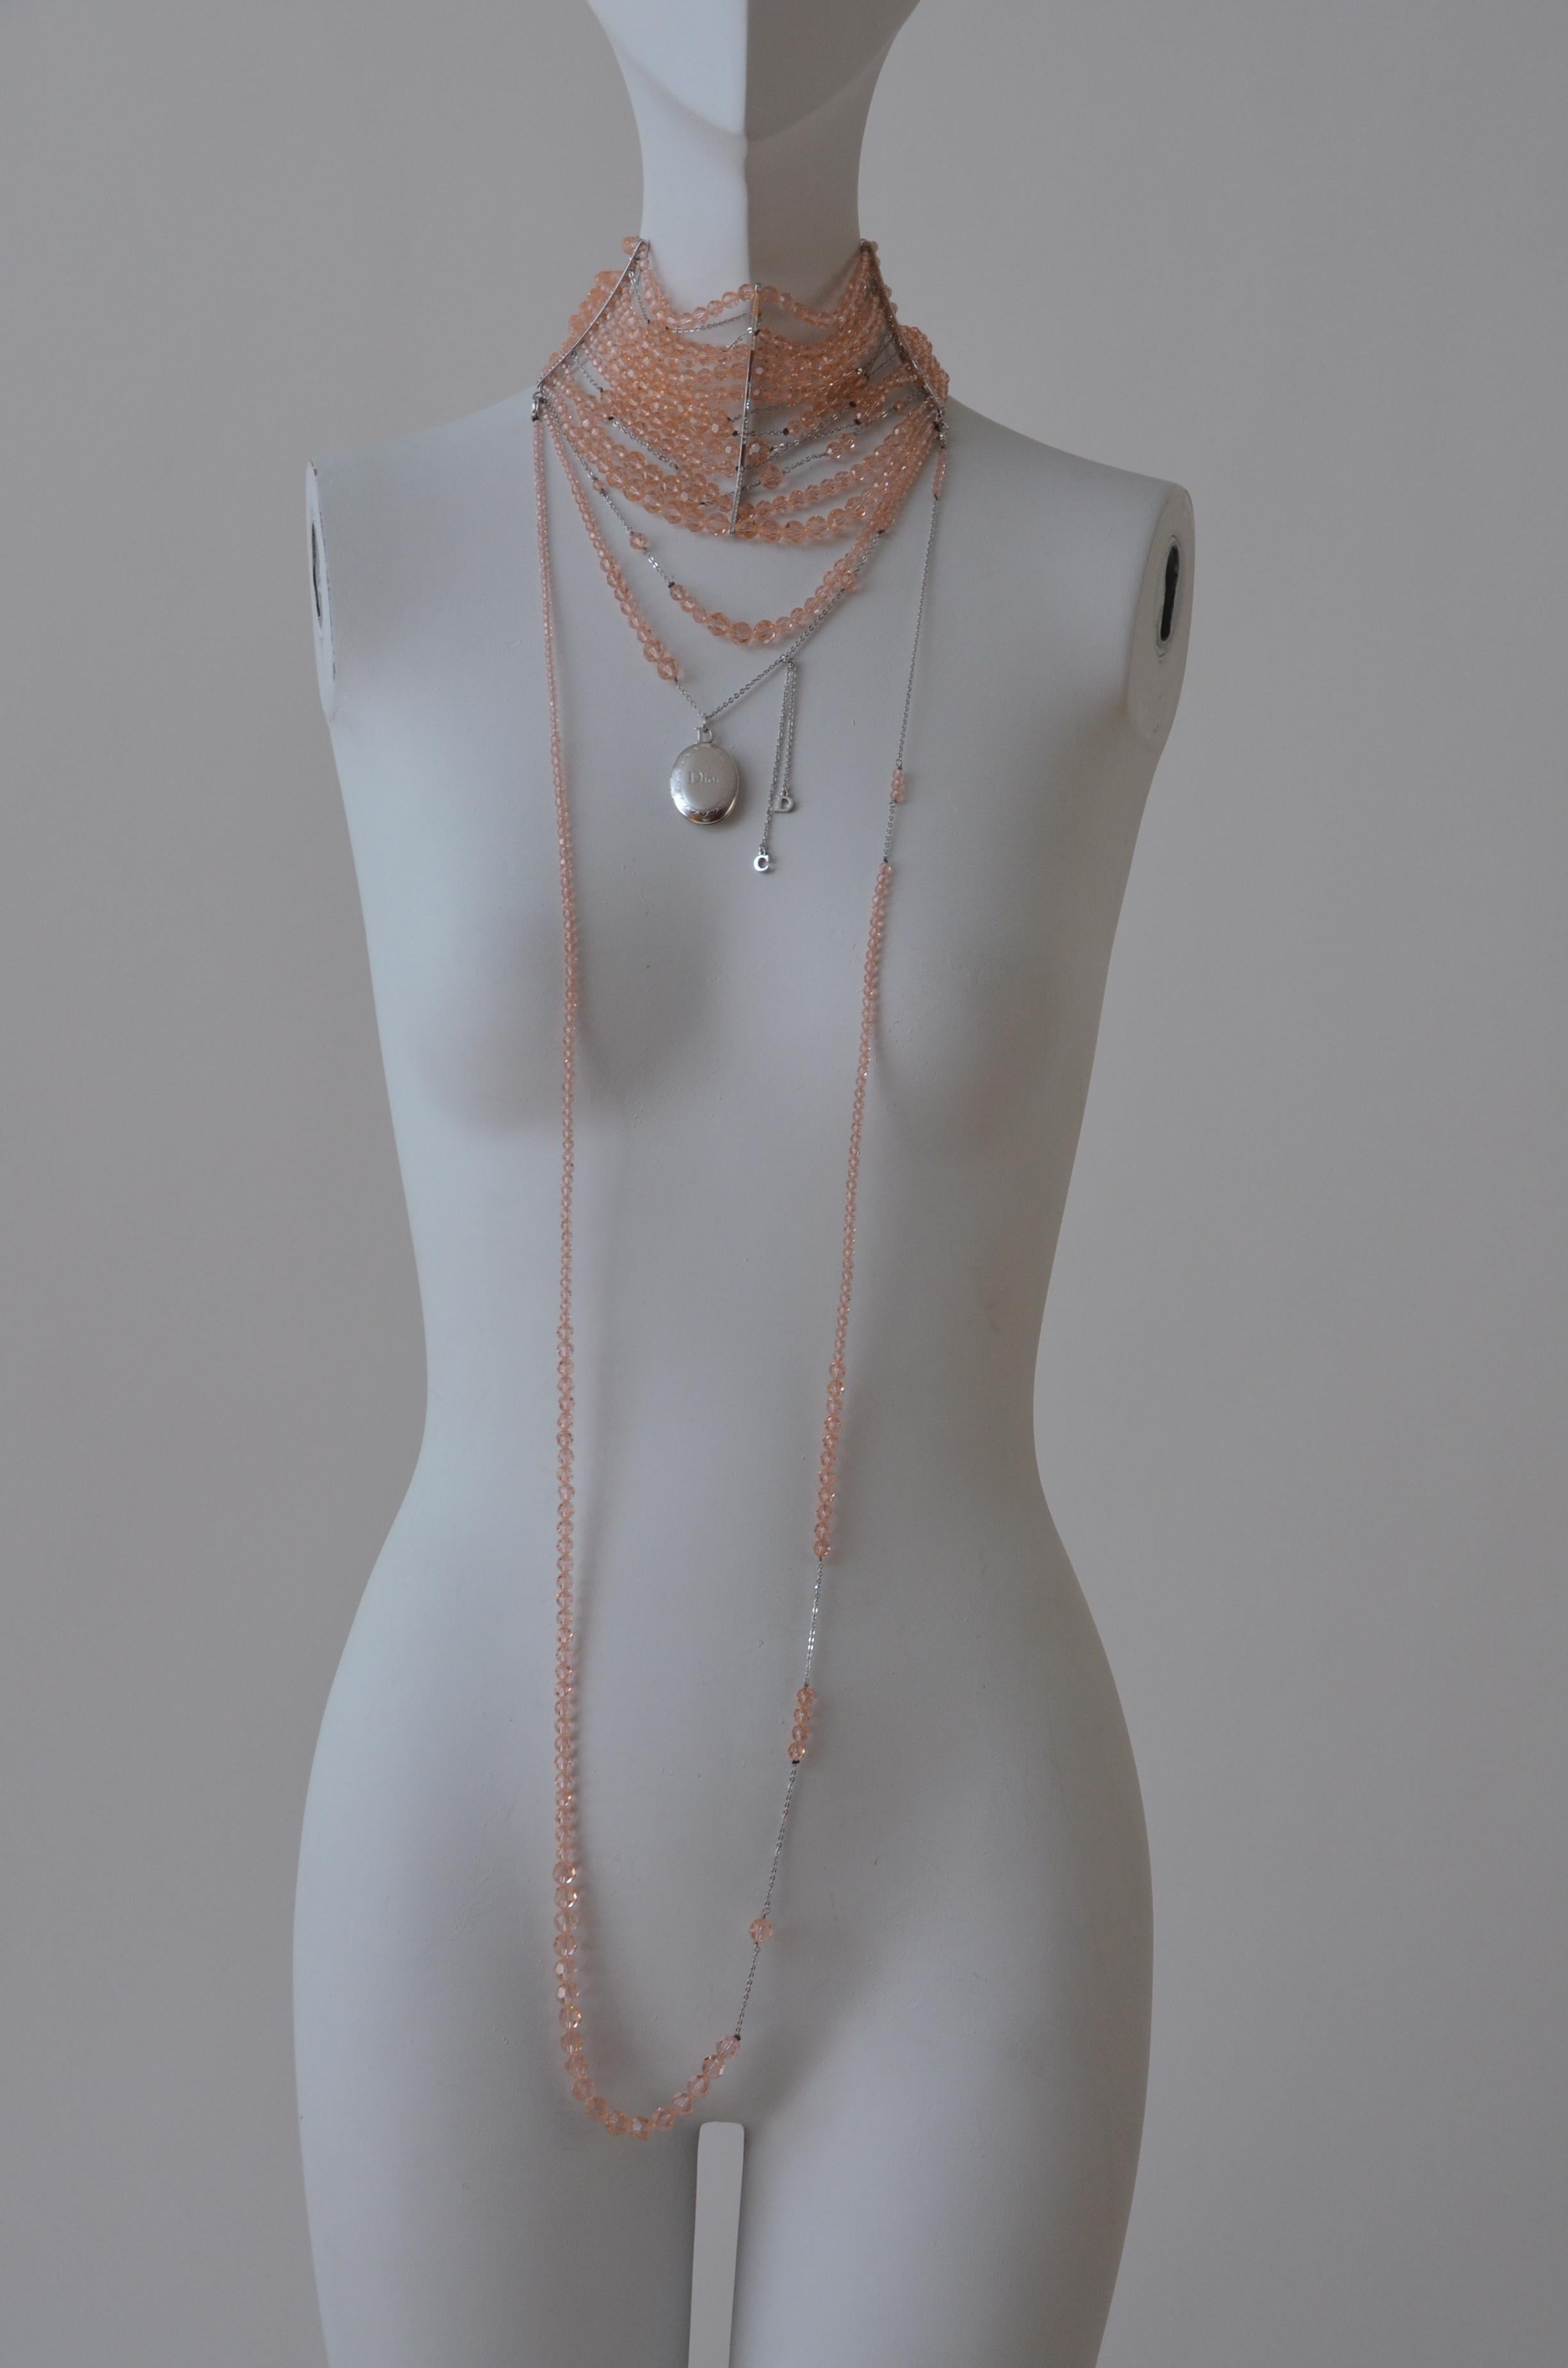 Amazing and rare  Christian DIOR John Galliano Masai Huge Pi color necklace/choker with rows of glass/crystals beads in pink peach color.
Silver tone locket  and C D charms hanging.
Two hooks closure in the back with D charms aded for tight